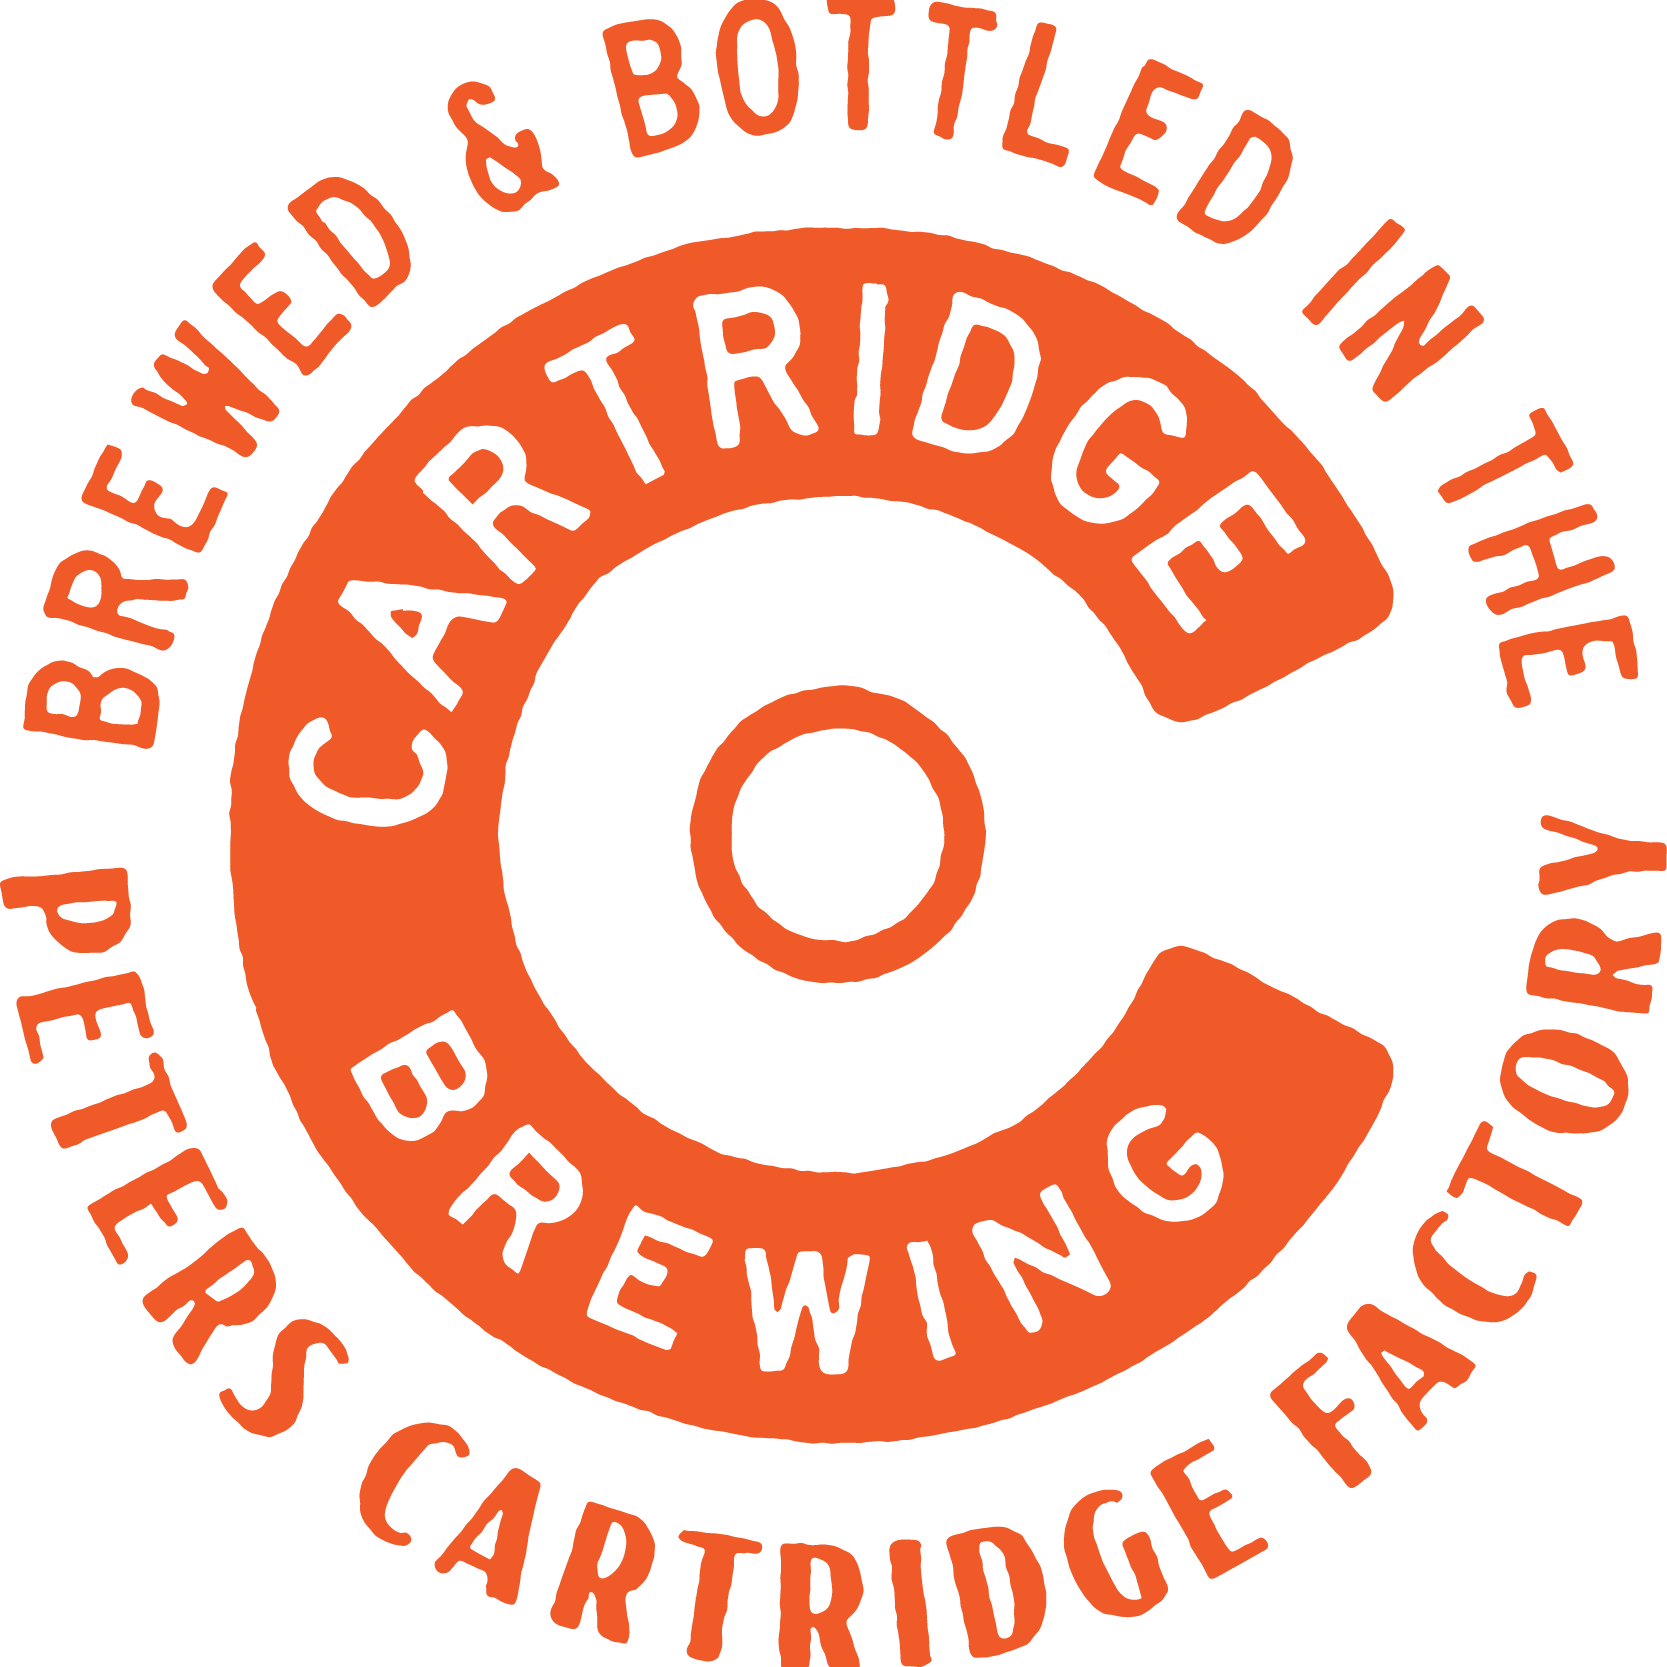 Cartridge Brewing. Brewed and bottle in the Peters Cartridge Factory.